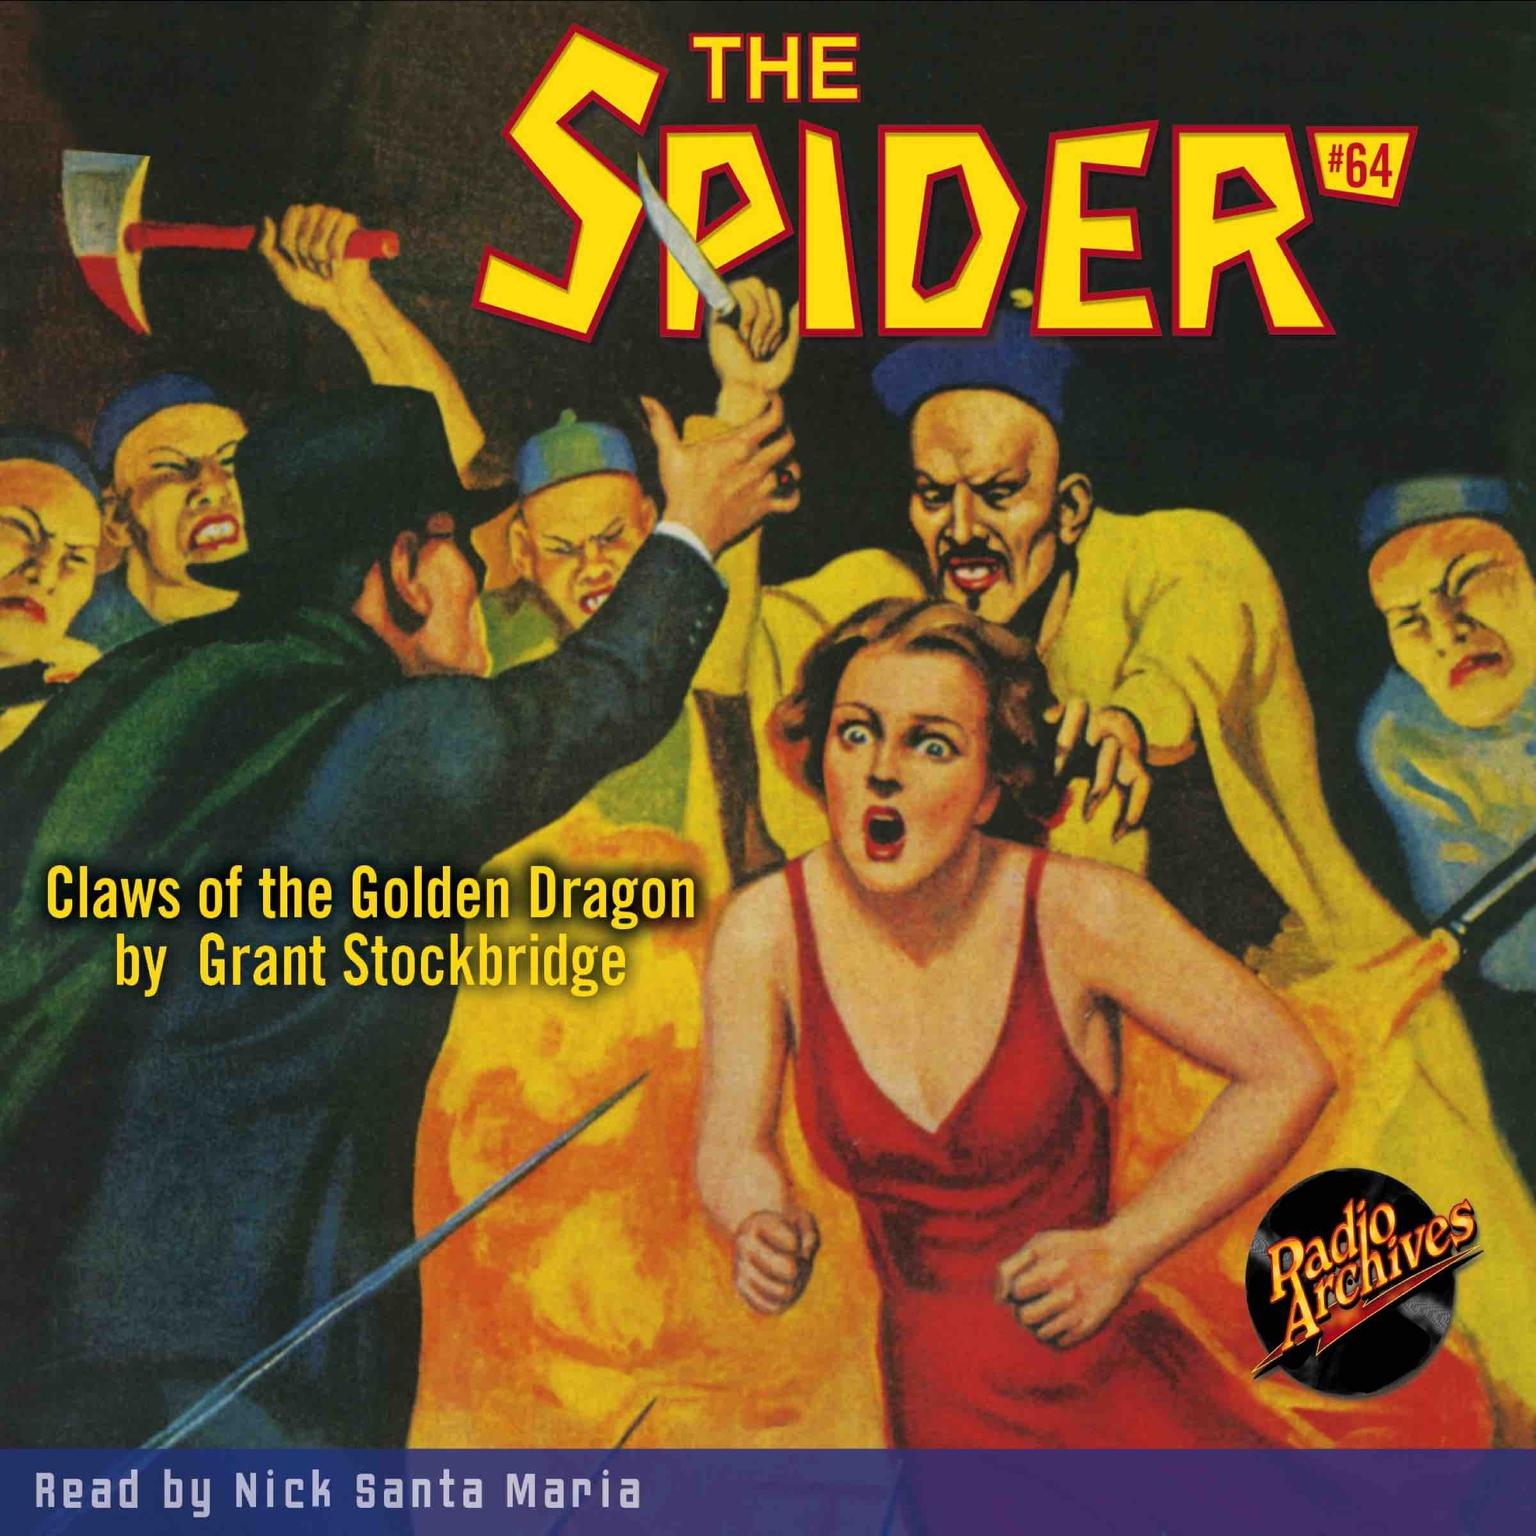 Spider #64, The: Claws of the Golden Dragon Audiobook, by Grant Stockbridge